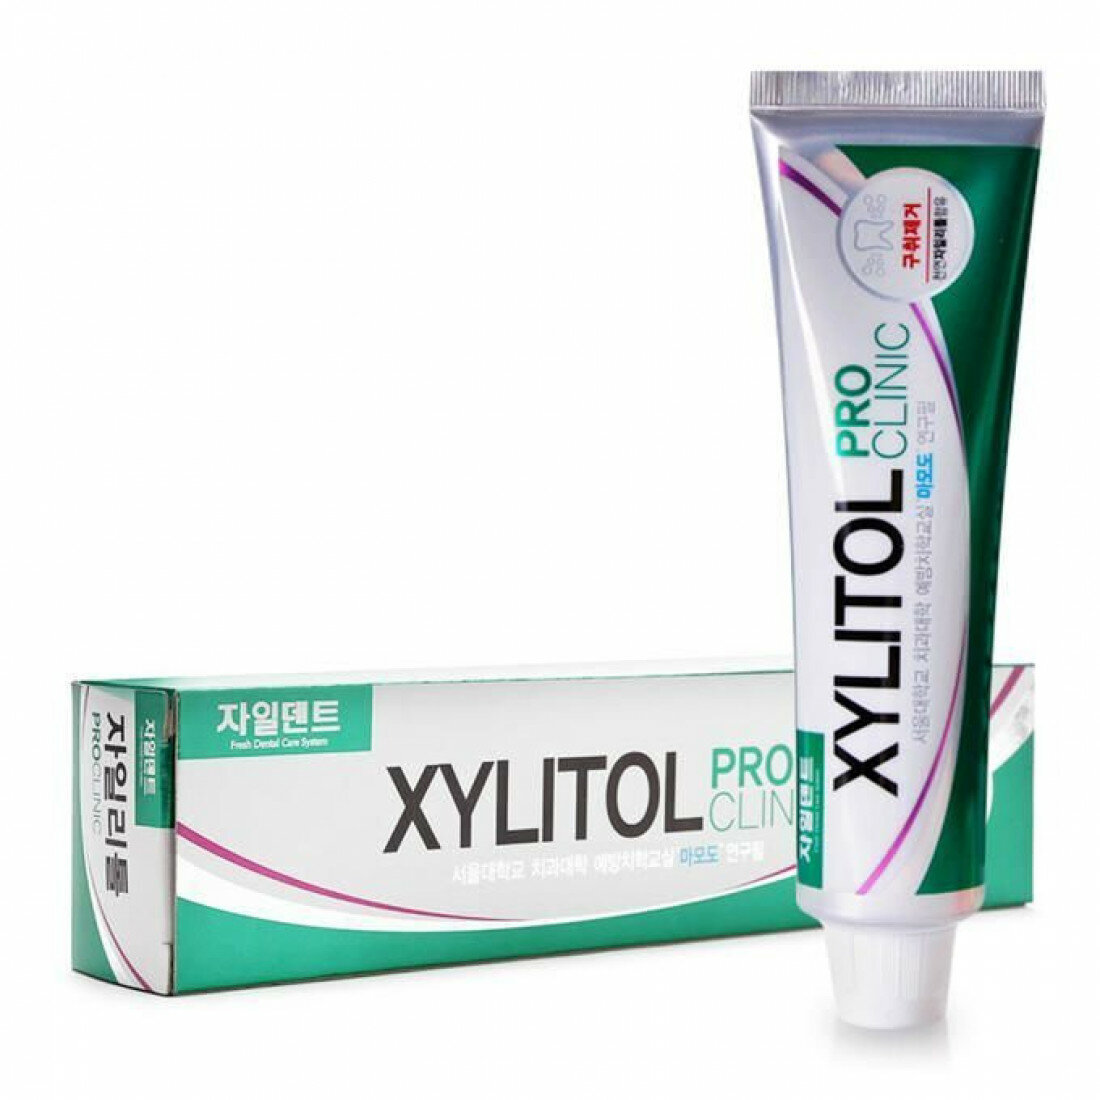 Mukunghwa Xylitol Зубная паста Xylitol Pro Clinic 130g (herb fragrant) green color